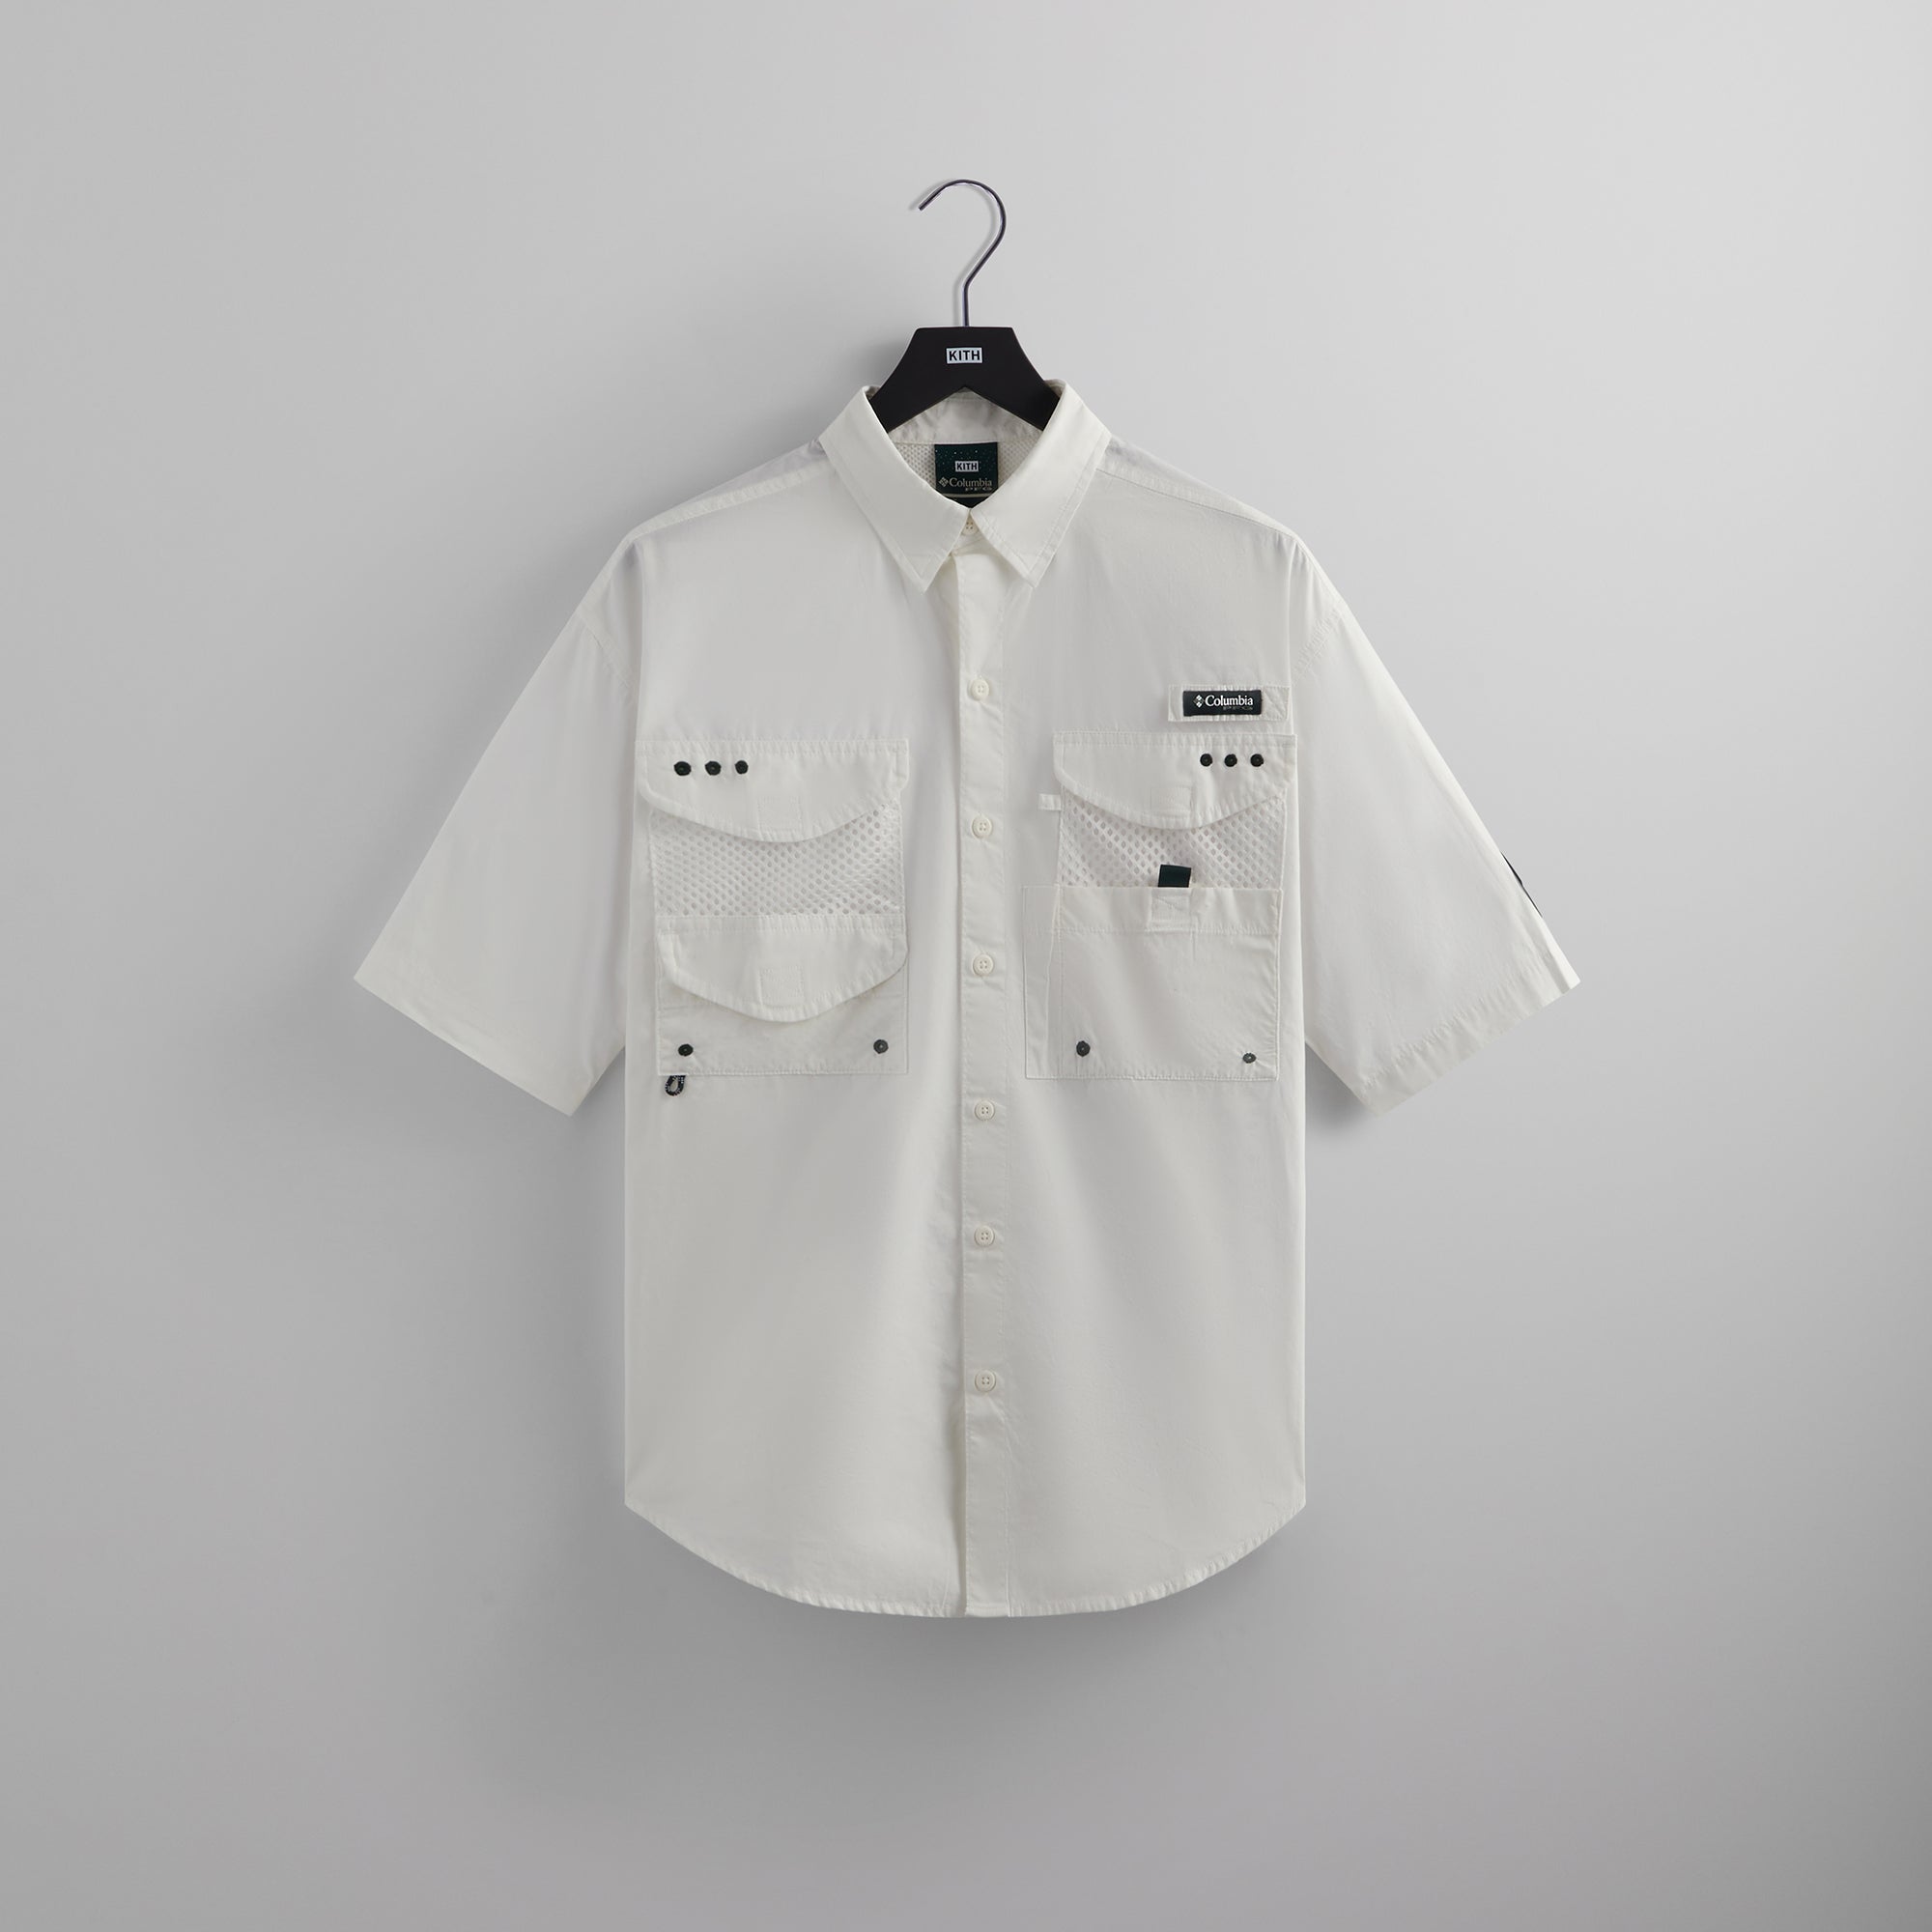 A Look at Kith for Columbia PFG